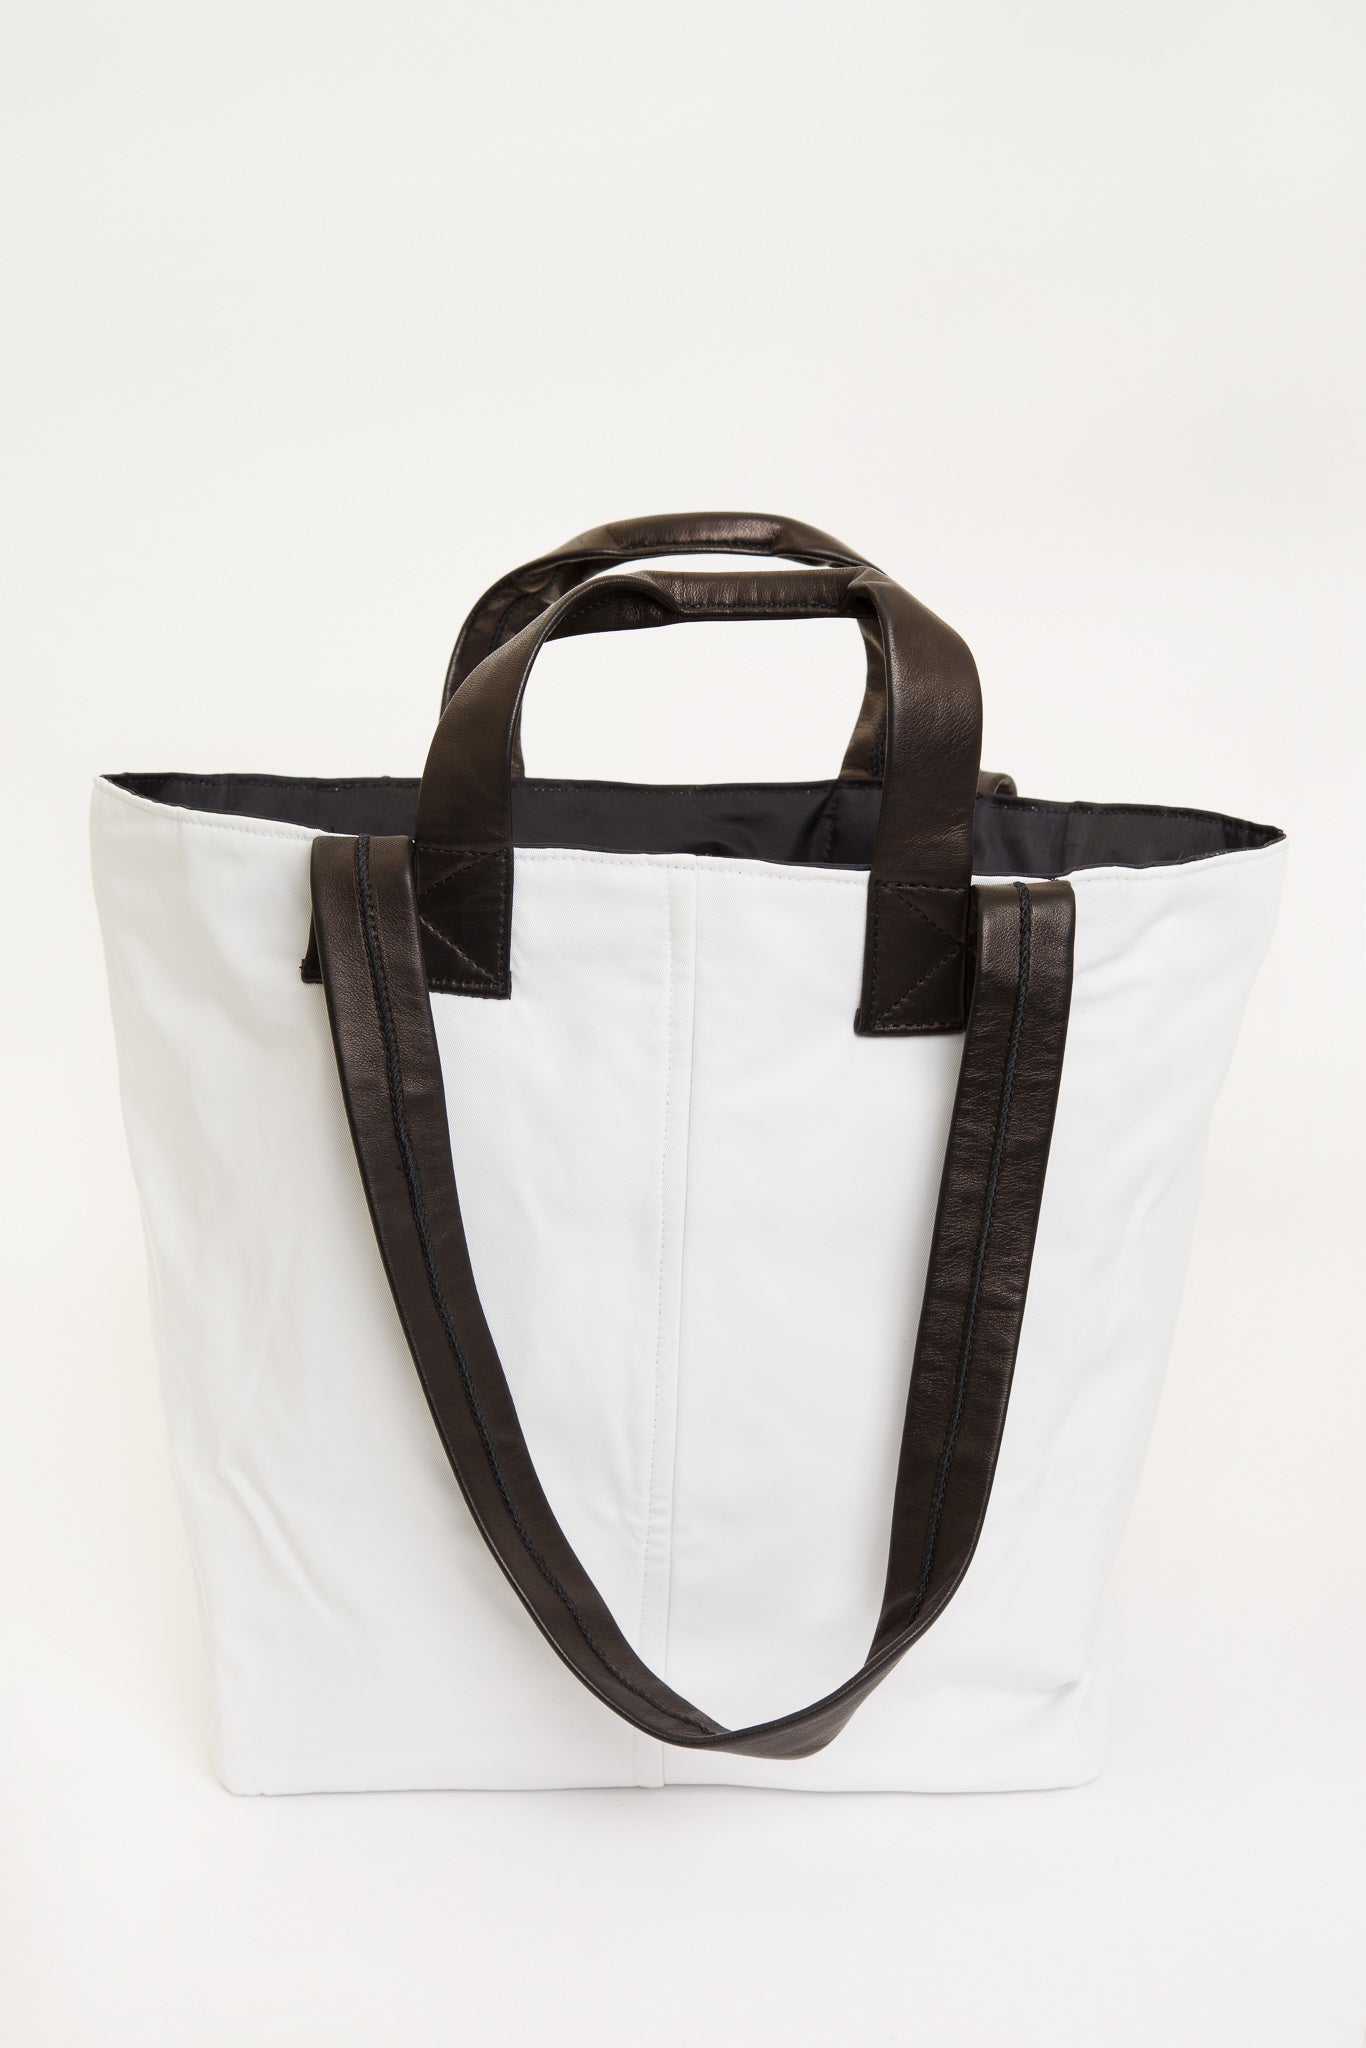 BIANCO SHOPPING TOTE WHITE AND BROWN LEATHER CONTRAST - Jarbo